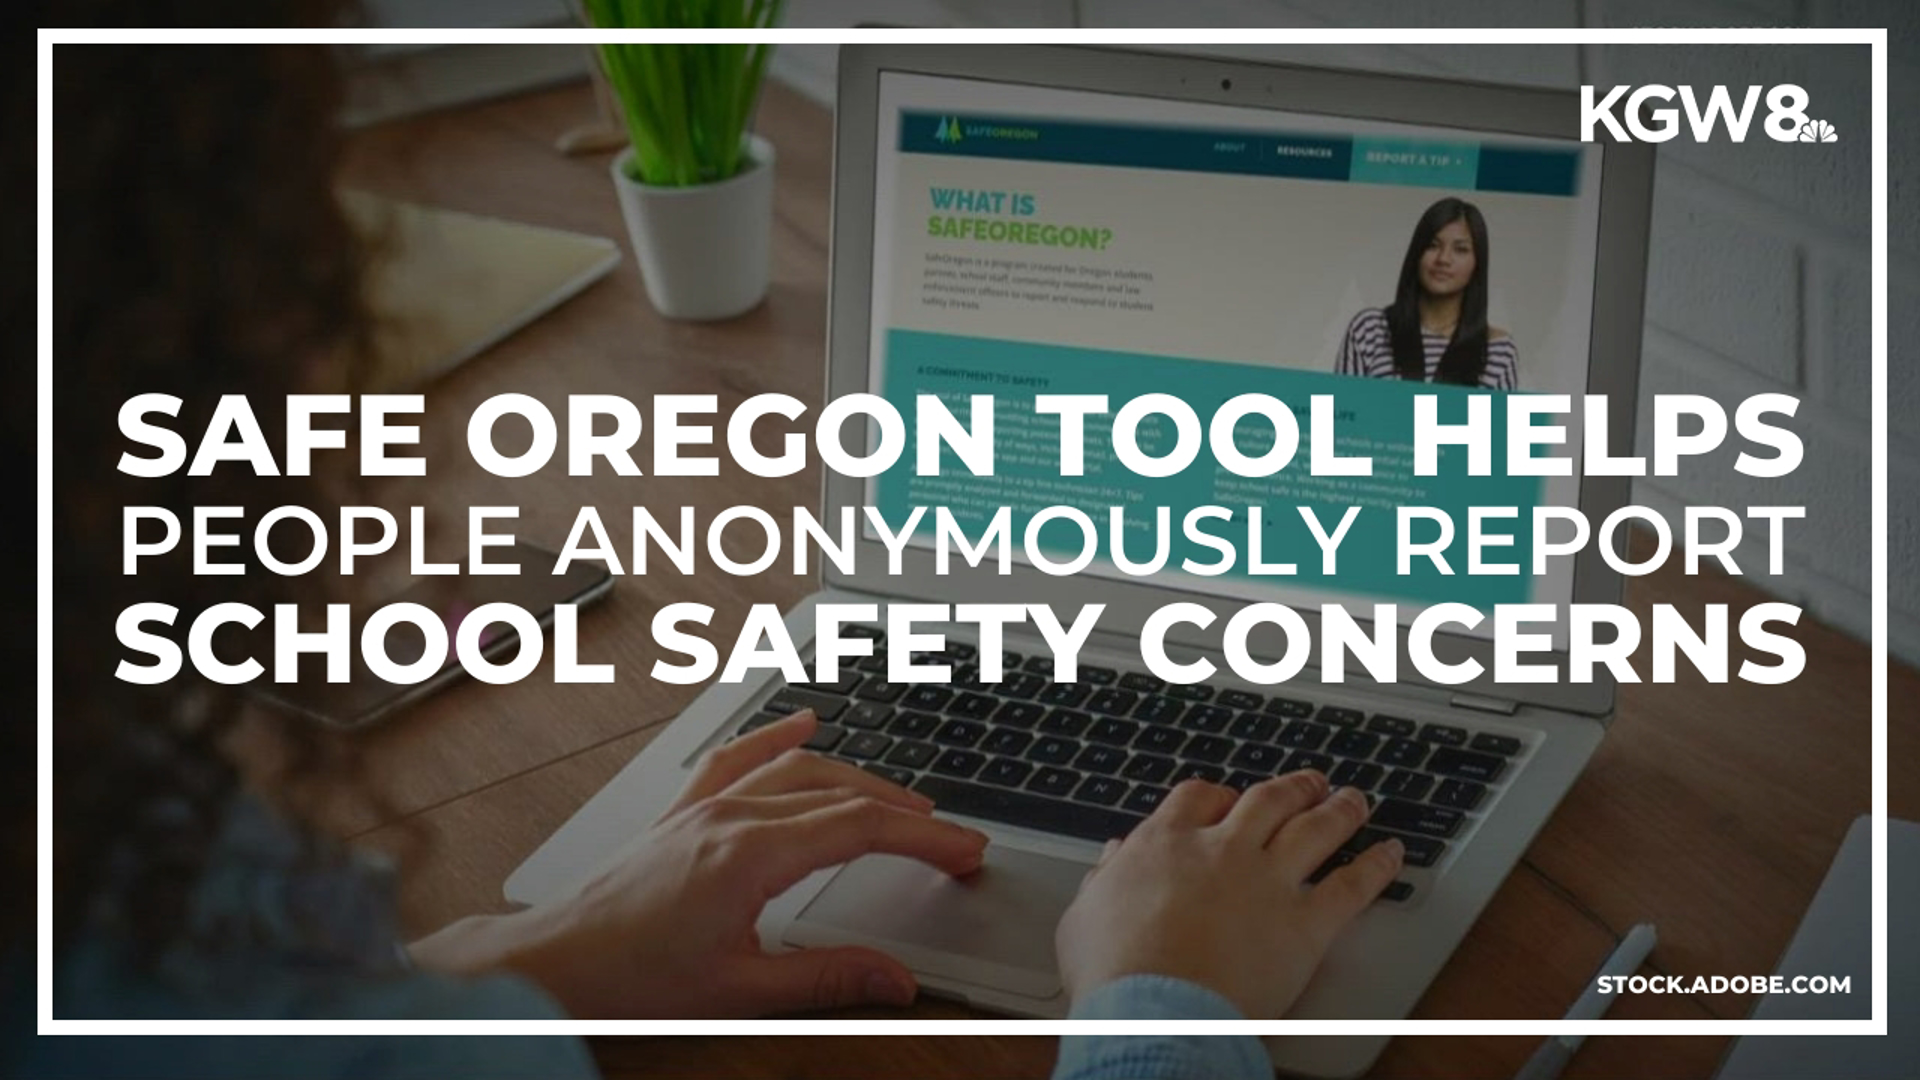 The program, run by Oregon State Police, has received 469 tips so far this year. It gives people an way to anonymously report concerns without fear of retaliation.